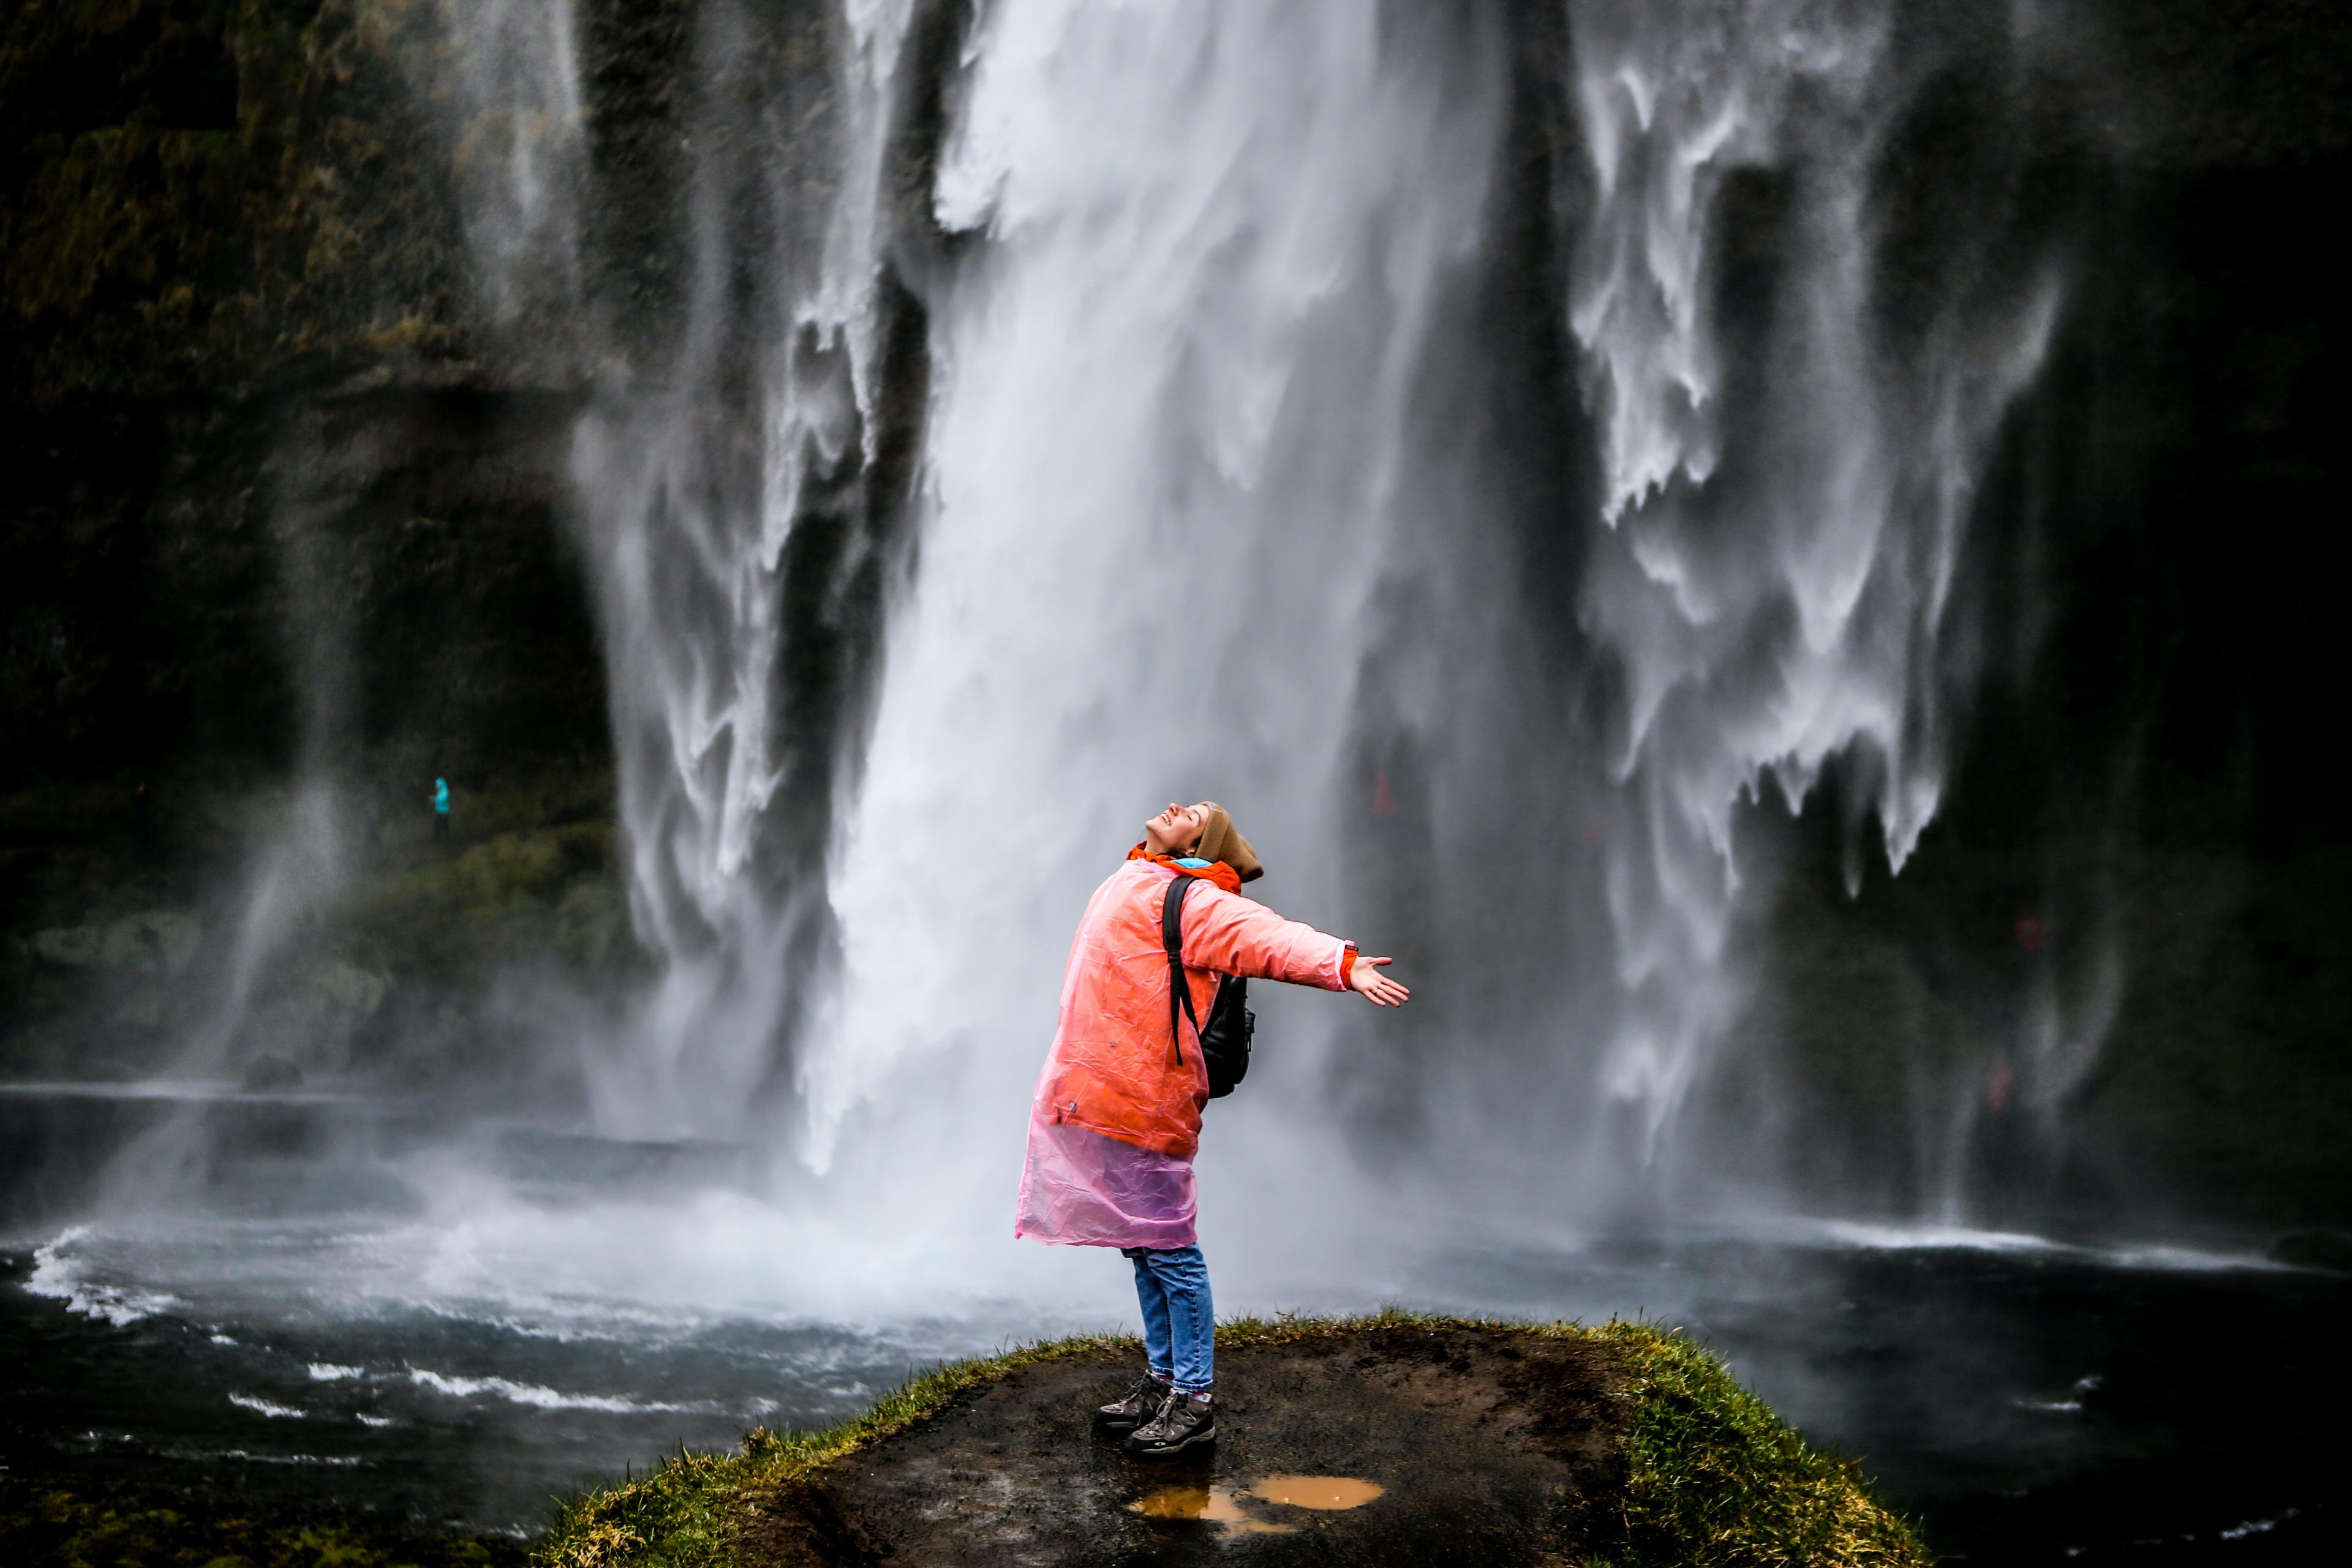 A person in a pink plastic raincoat joyfully spreading their arms beside the majestic Seljalandsfoss waterfall.